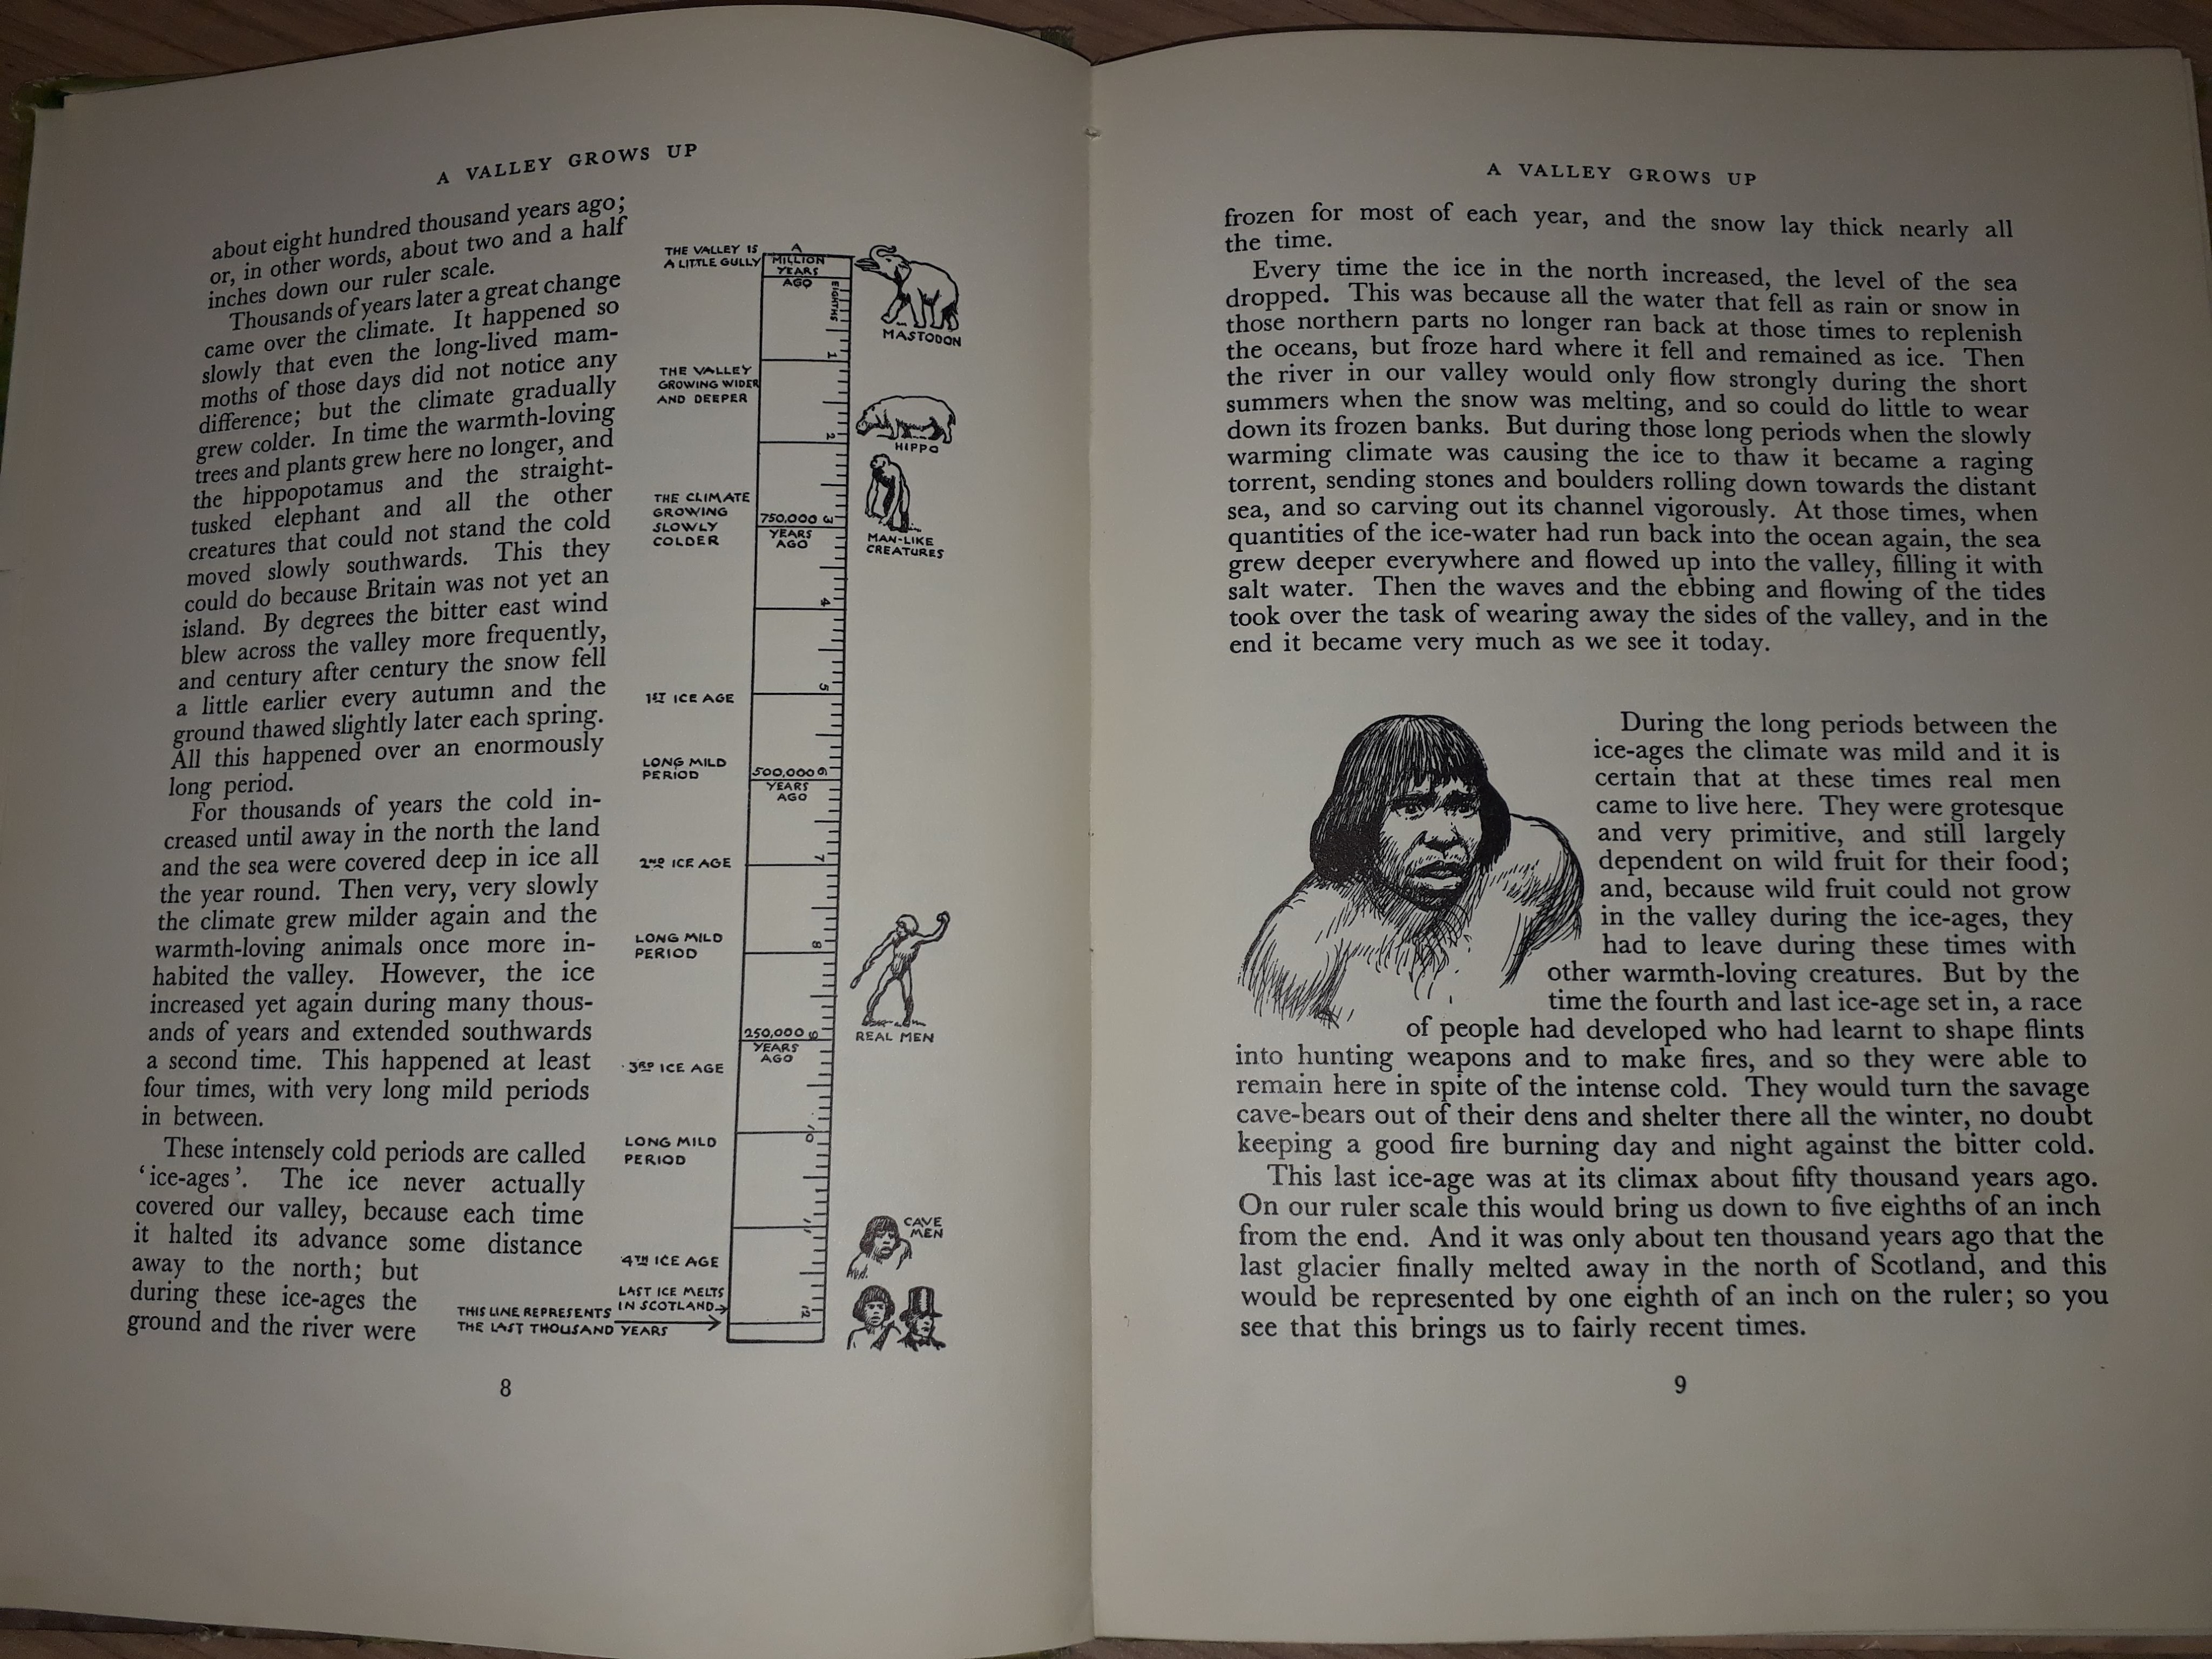 Two pages from the book 'A Vallery Grows Up', discussing ice ages and the emergence of modern man, On the left-hand page is a line drawing of a ruler used to represent time: it shows that the last thousand years represent only the thickness of one of the lines marking the inches. On the right-hand page is a line drawing of early man (head and shoulders profile).